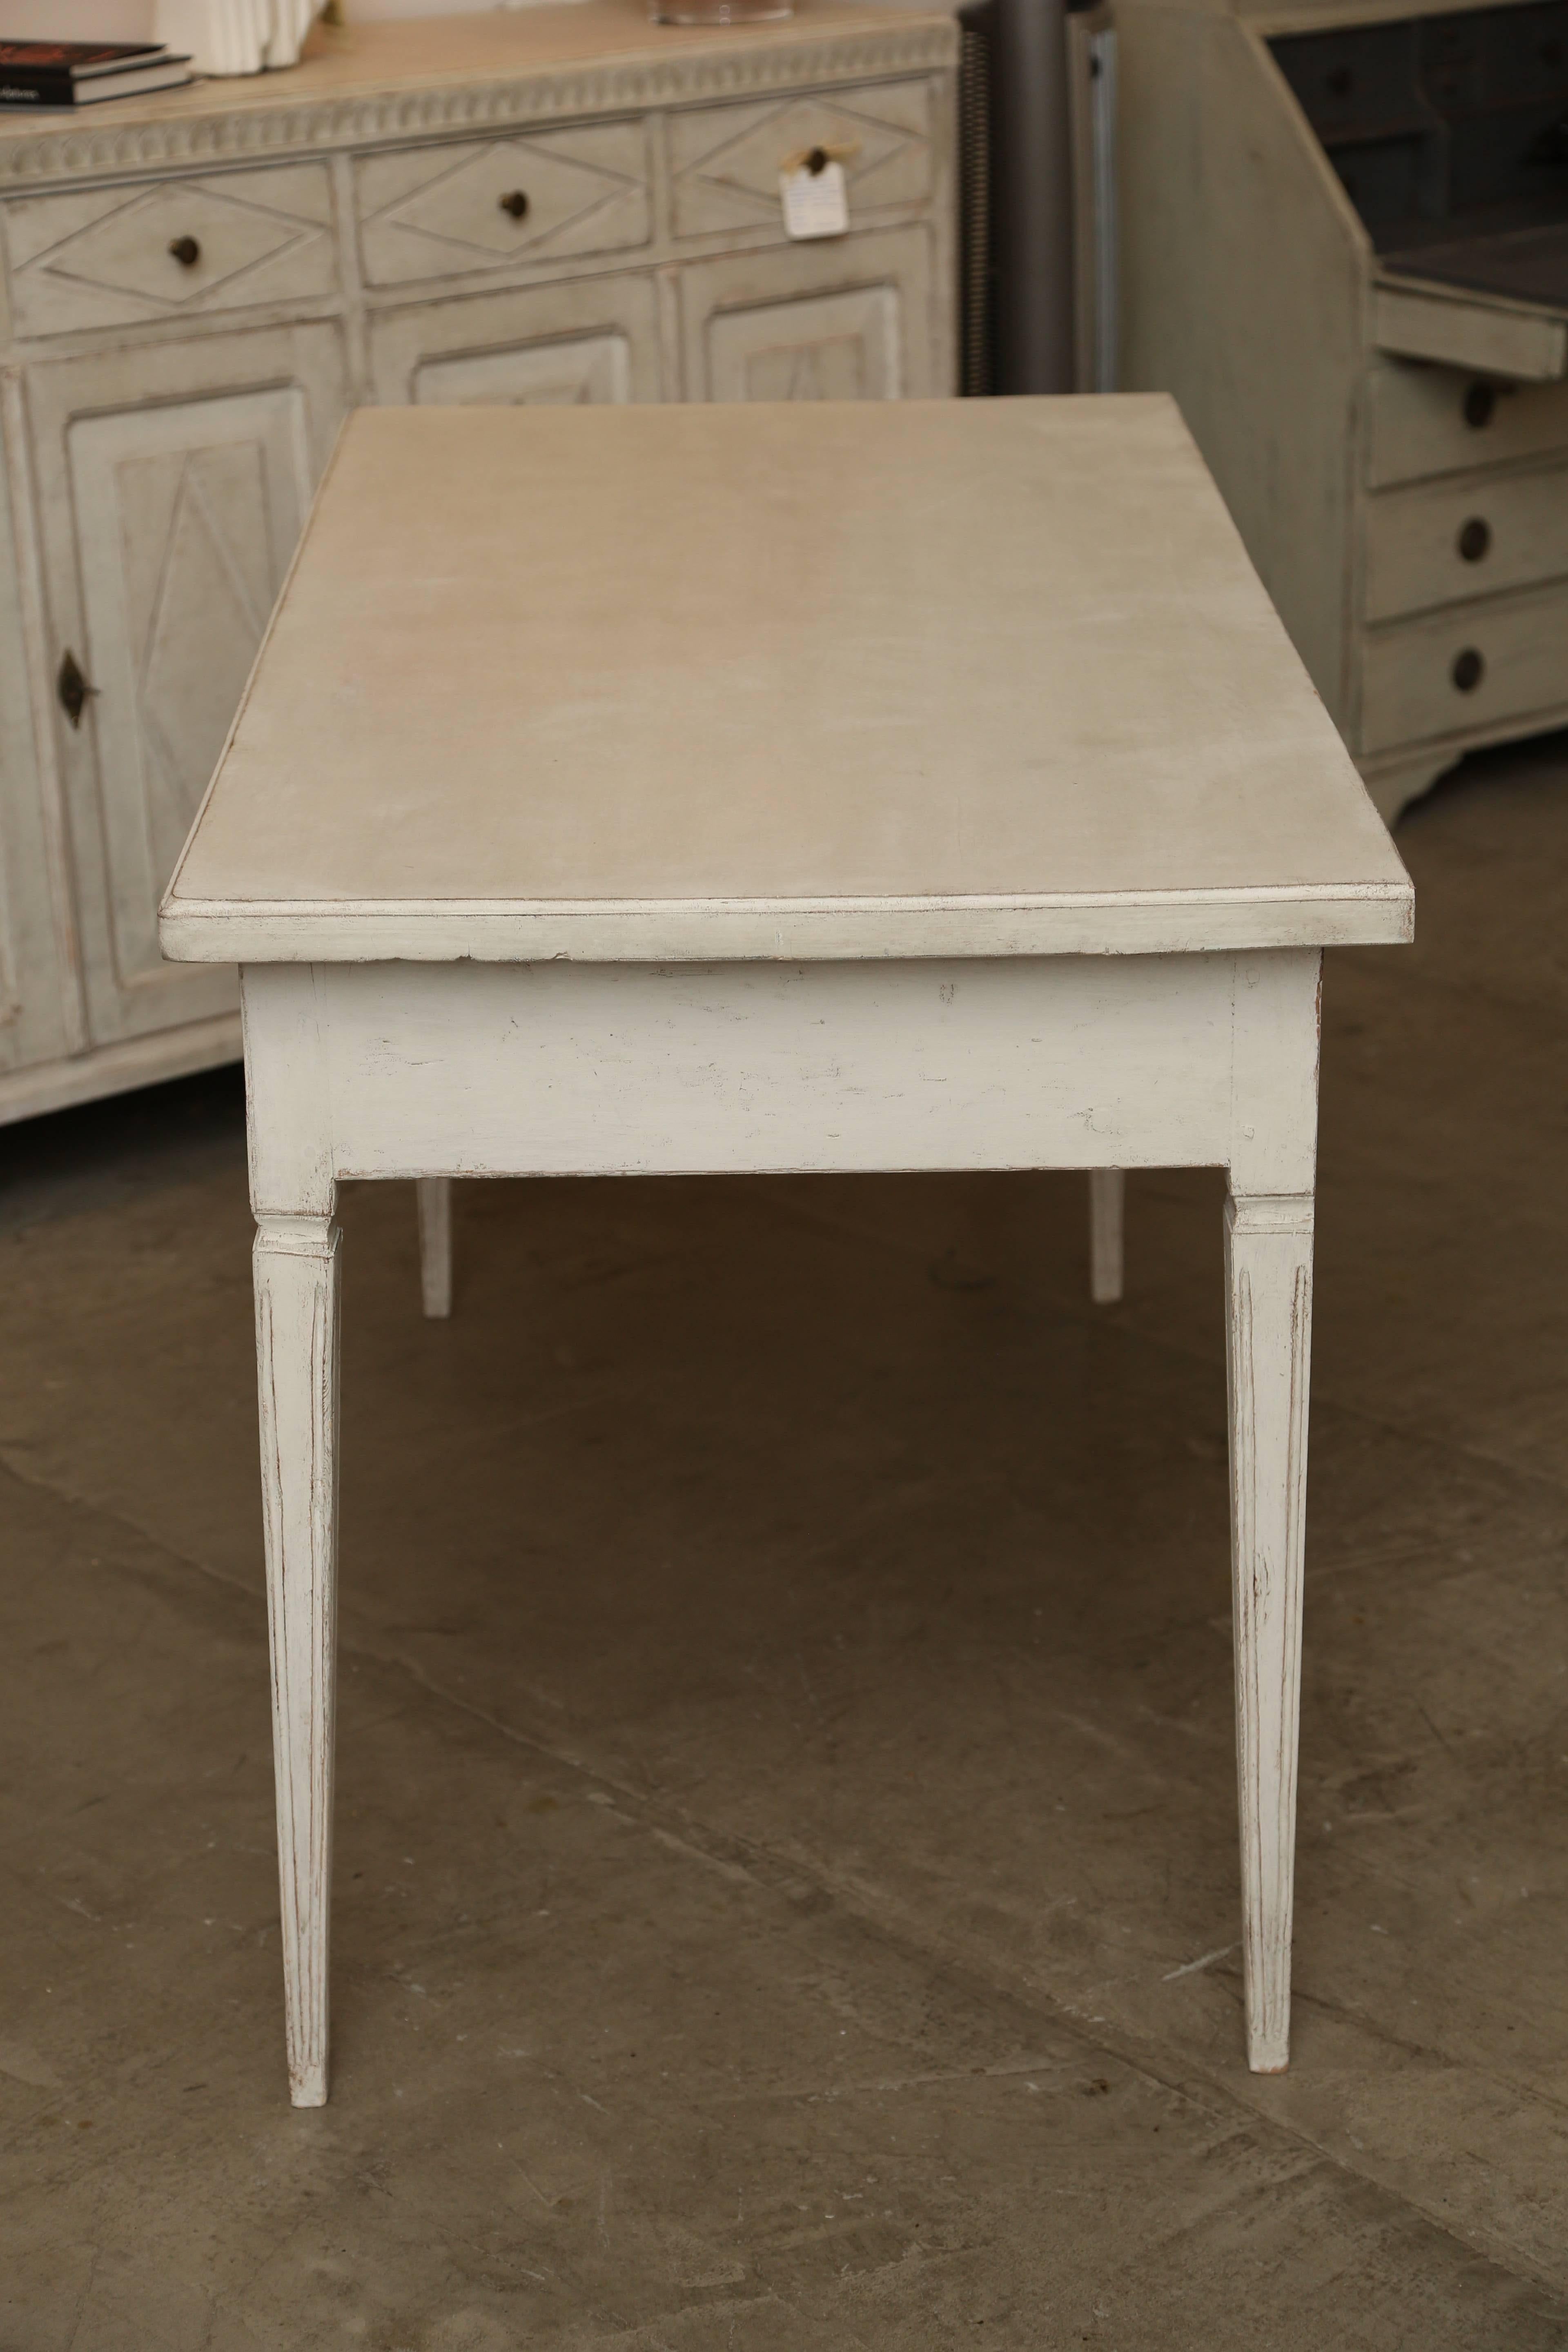 Large antique Swedish period writing desk with refreshed Gustavian distressed white paint and two carved ribbed drawers. Sits beautifully on tapered fluted legs.

Measures: 31.25'' high
58.25'' wide
27.75'' deep.